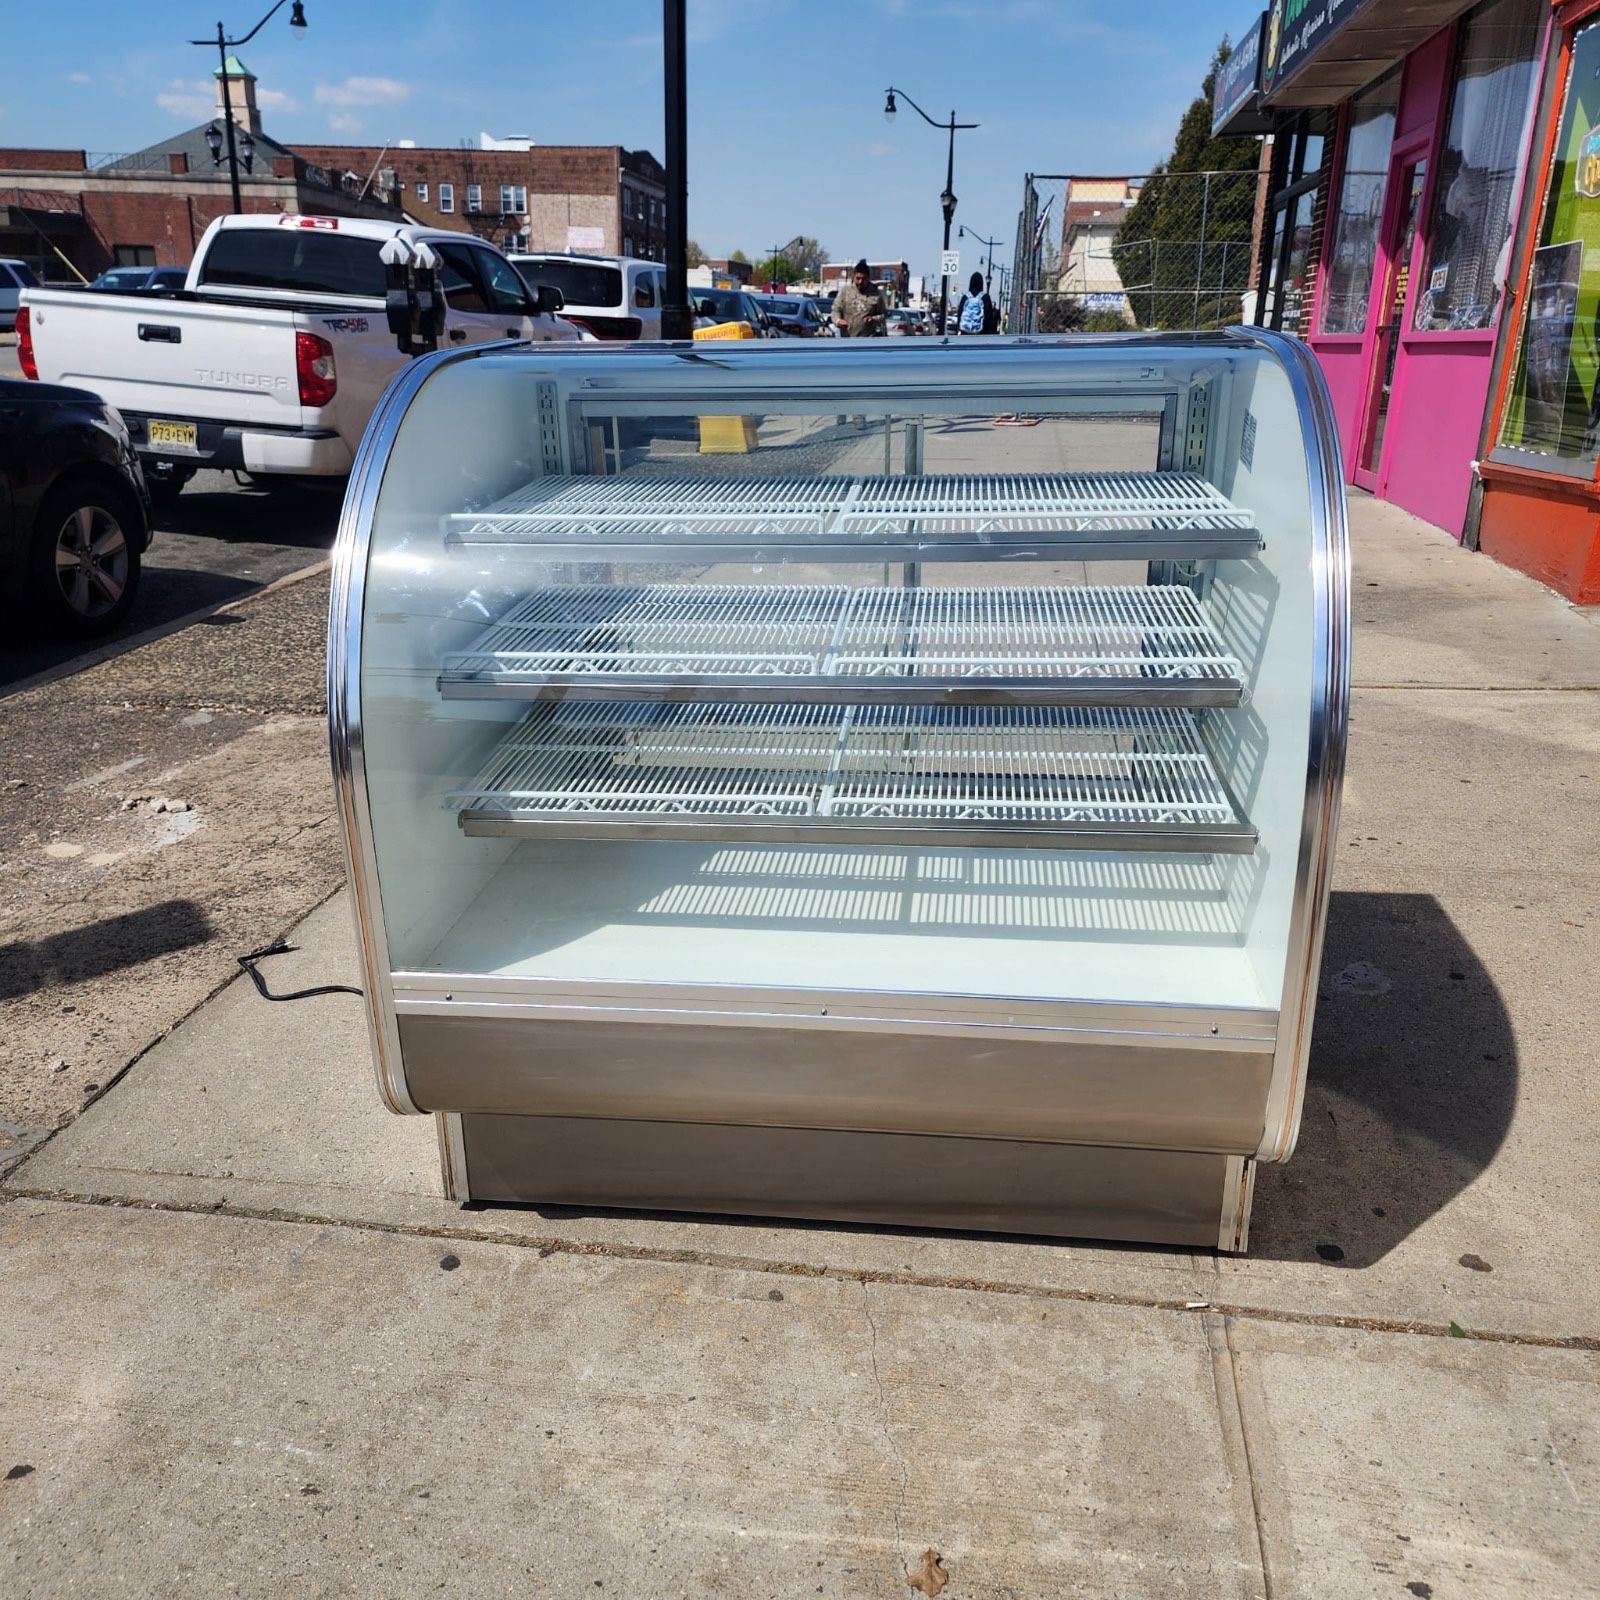 Leader 48” Refrigerated Curved Glass Bakery Case